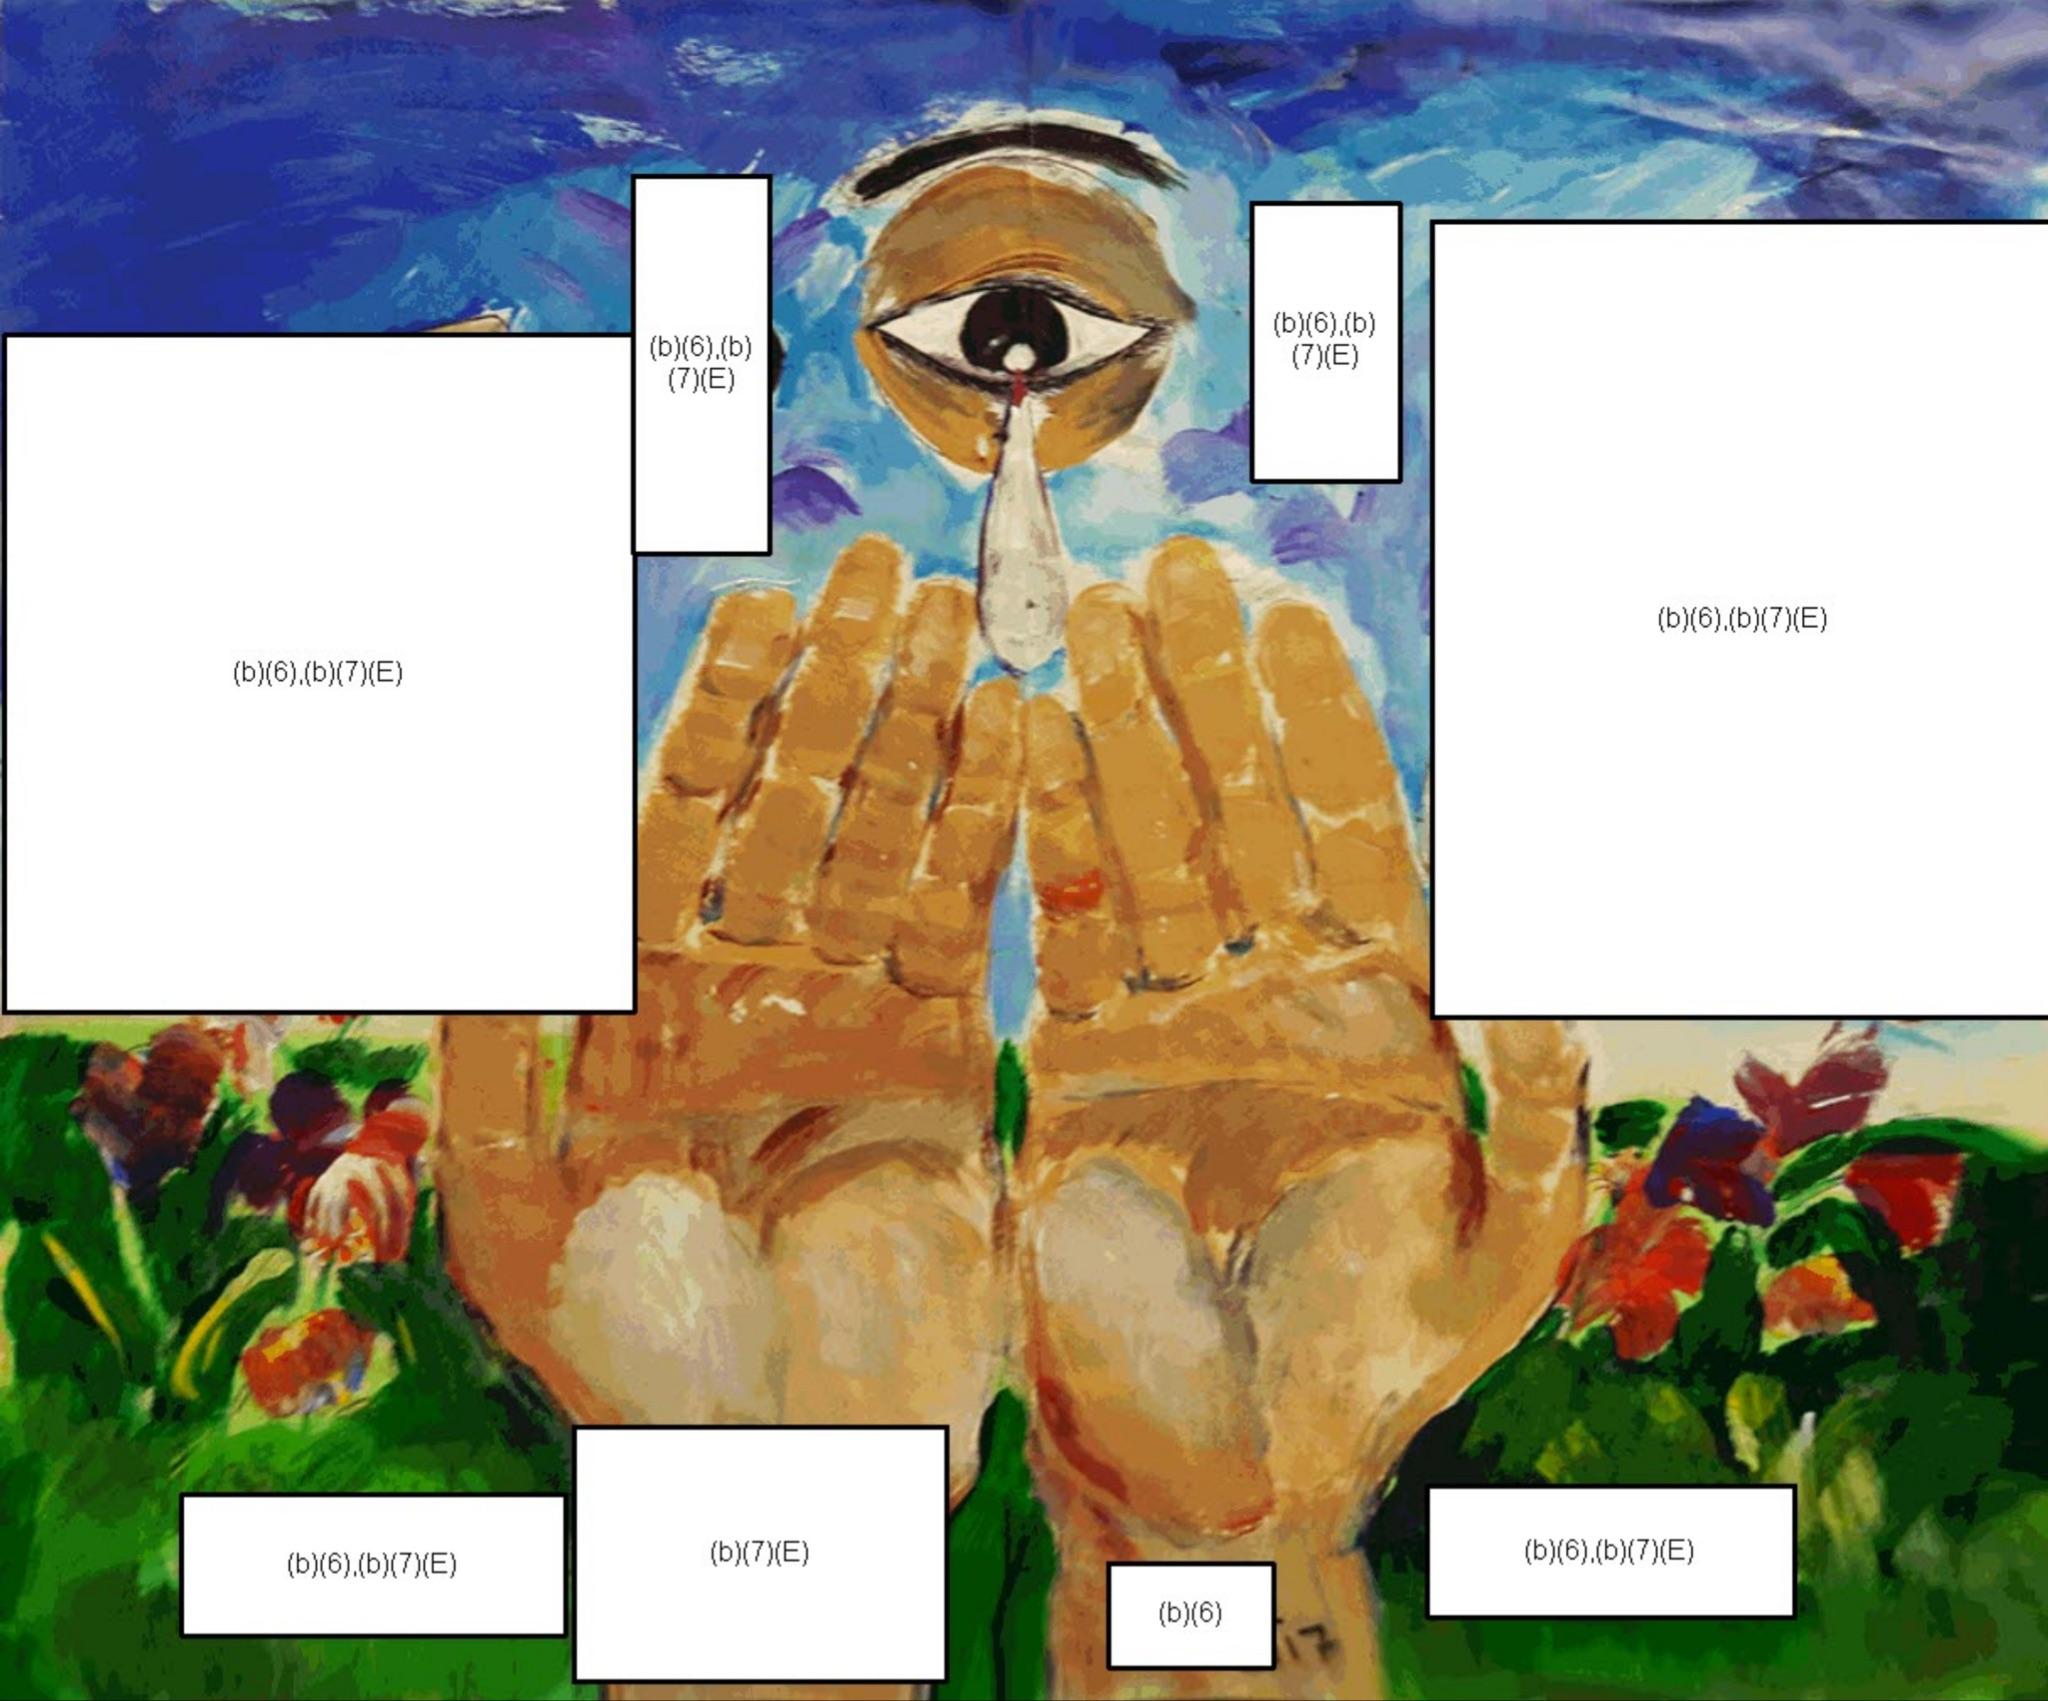 A painting of two outstretched hands with a floating eye crying into them. Eight sections of the painting are redacted with b7e.